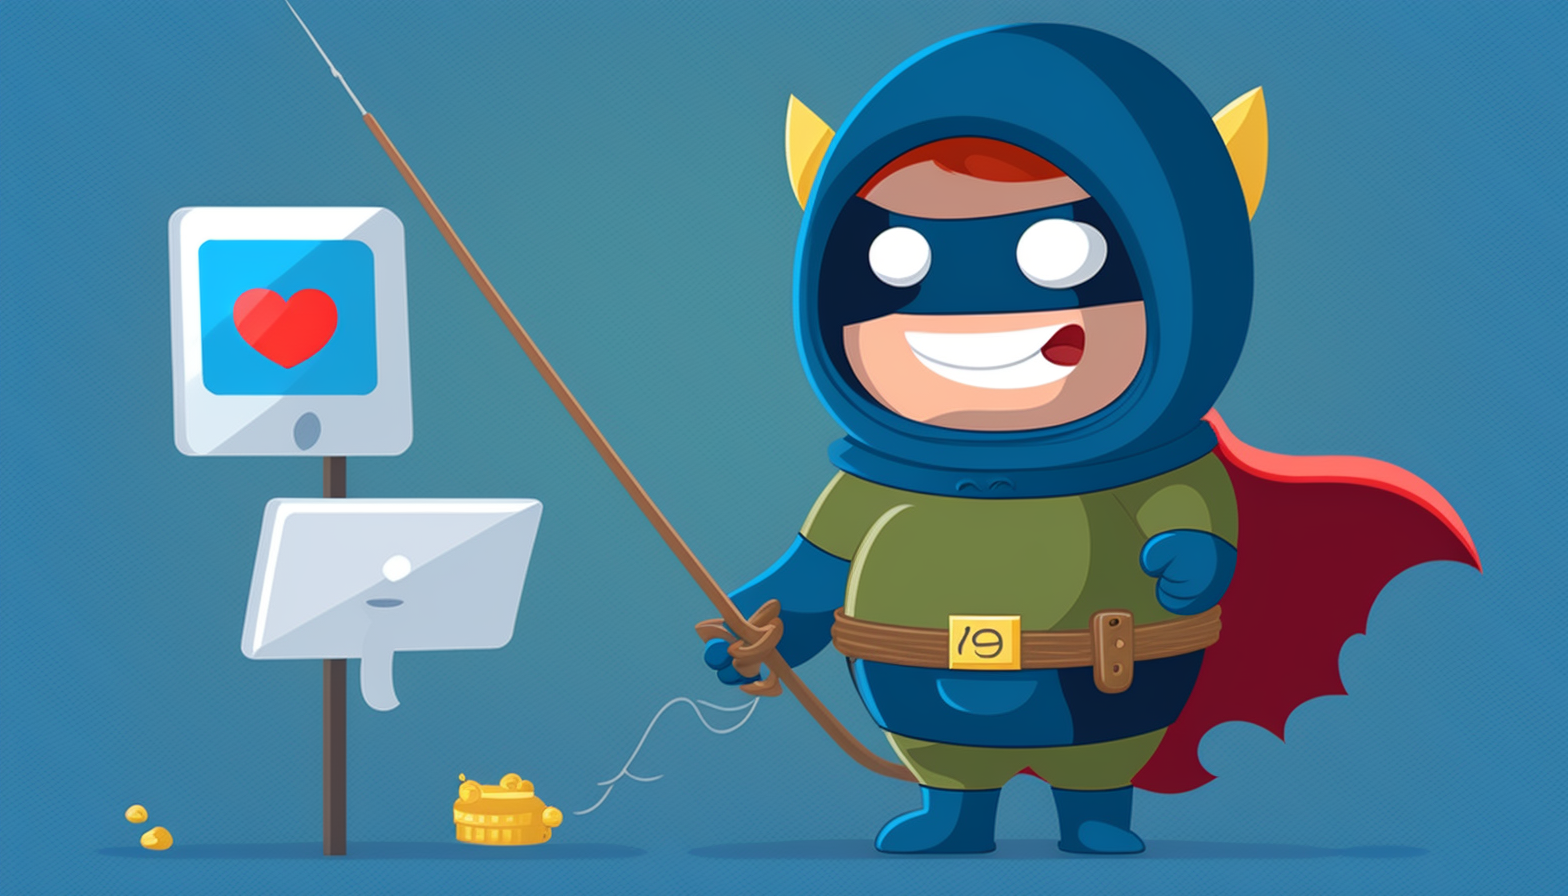 An image of a cartoon character with a superhero costume and a shield blocking a fishing rod with a phishing email on it.